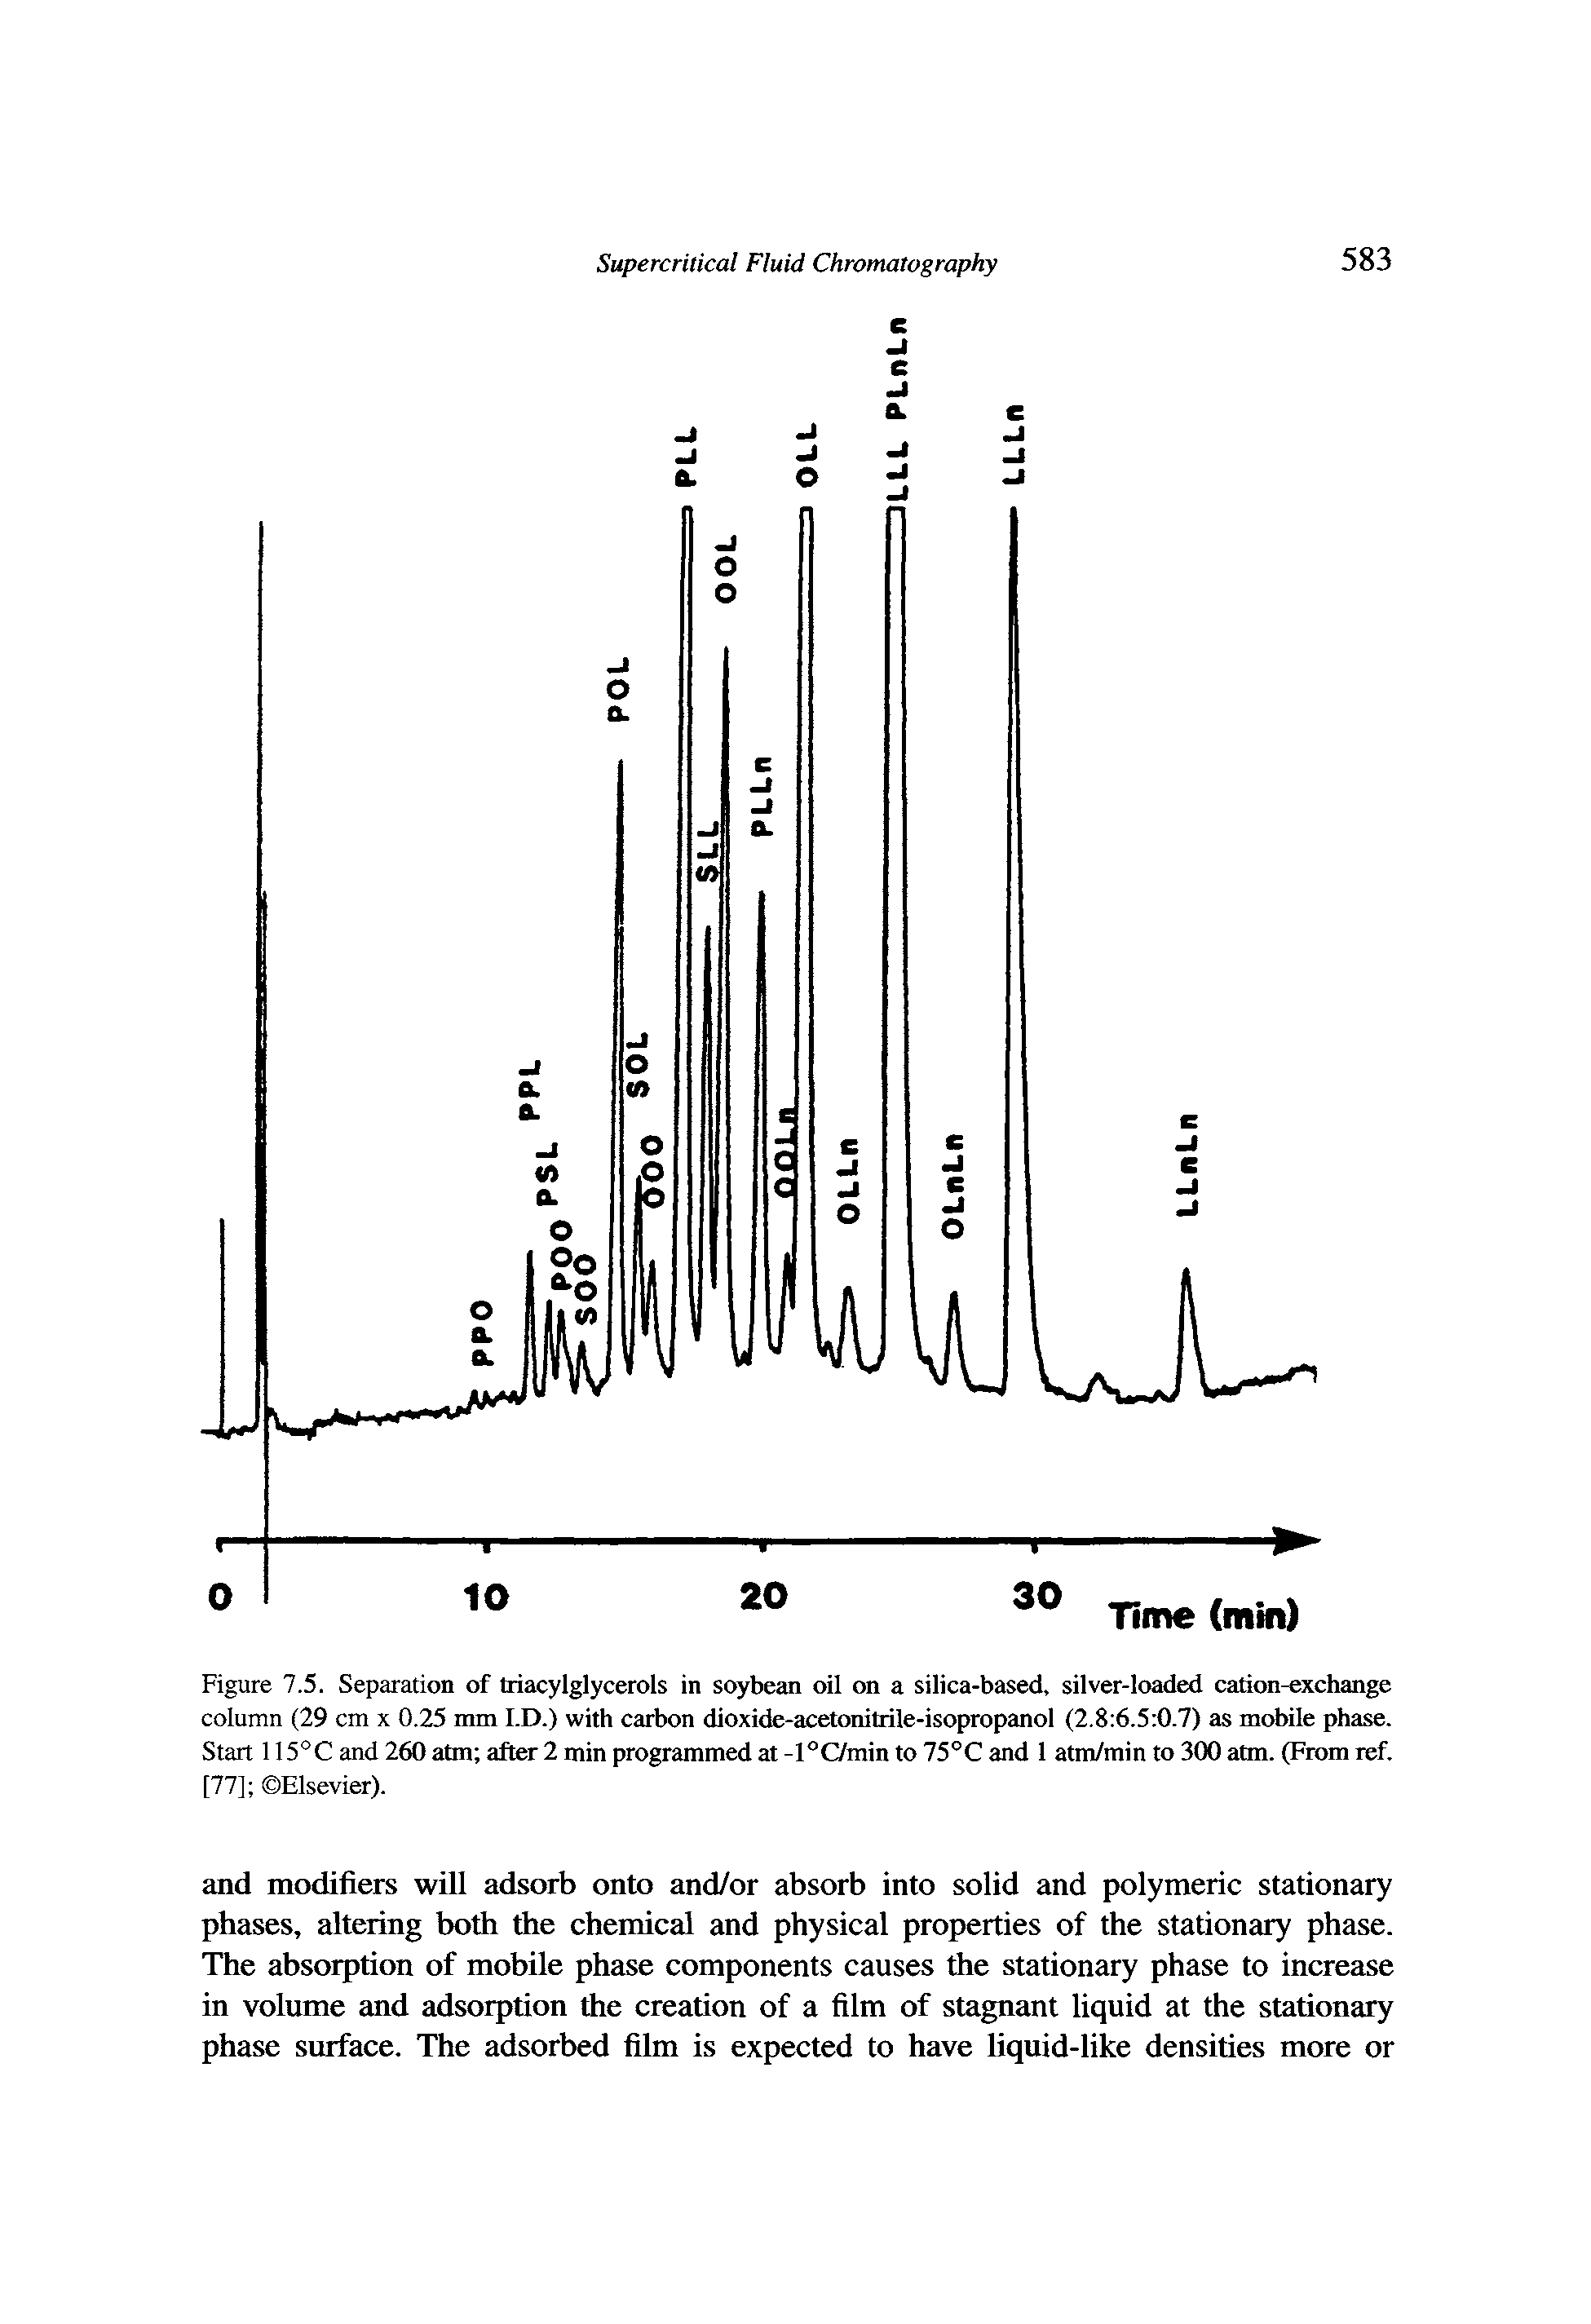 Figure 7.5. Separation of triacylglycerols in soybean oil on a silica-based, silver-loaded cation-exchange column (29 cm x 0.25 mm I.D.) with carbon dioxide-acetonitrile-isopropanol (2.8 6.5 0.7) as mobile phase. Start 115°C and 260 atm after2 min programmed at-l CVmin to 75°C and 1 atm/min to 300 atm. (From ref.